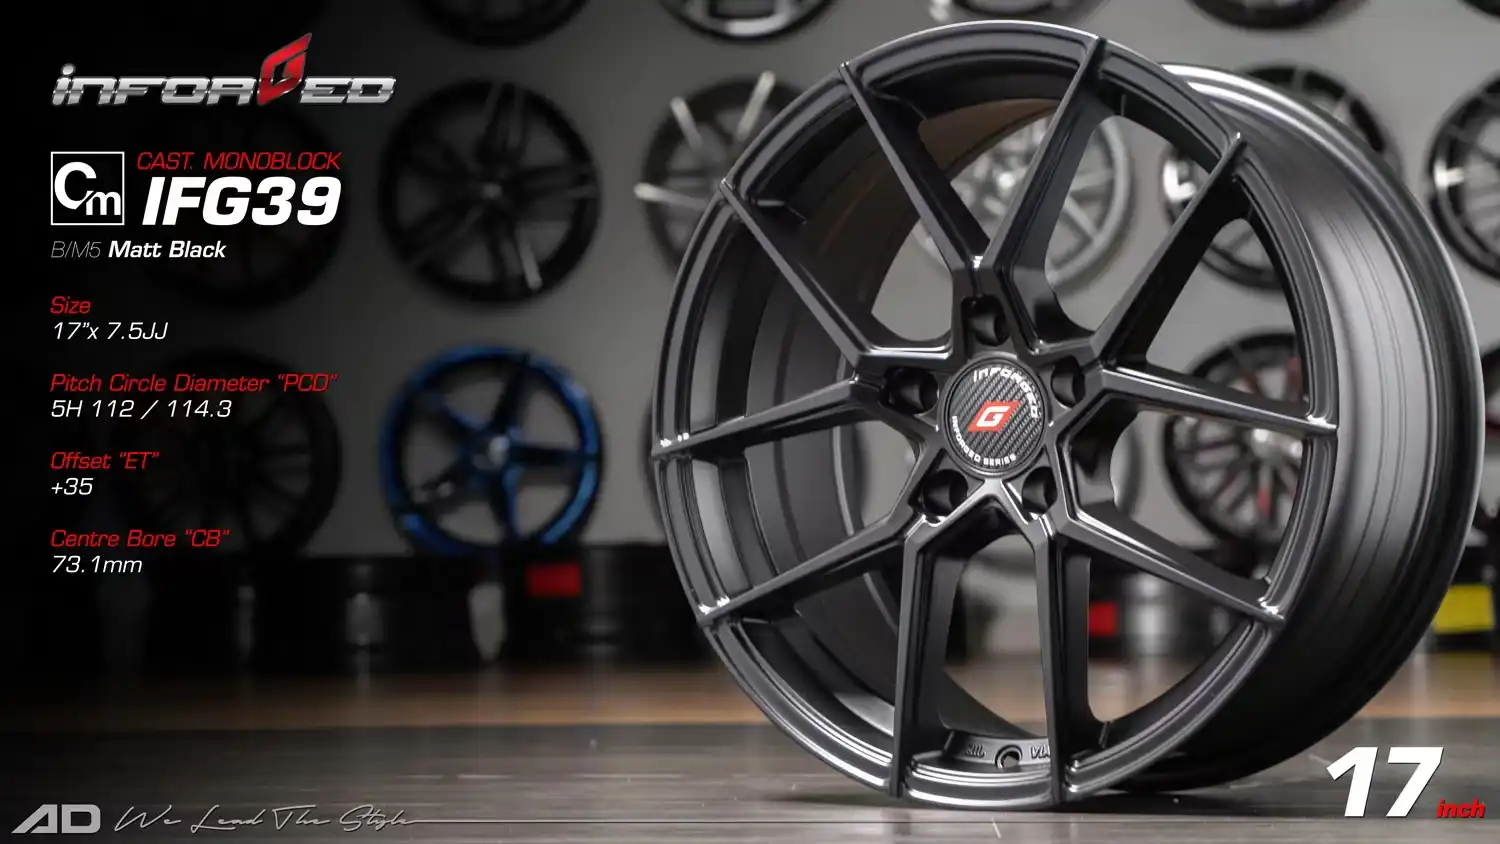 Ad wheels | Inforged ifg39 17 inch 5H112/114.3